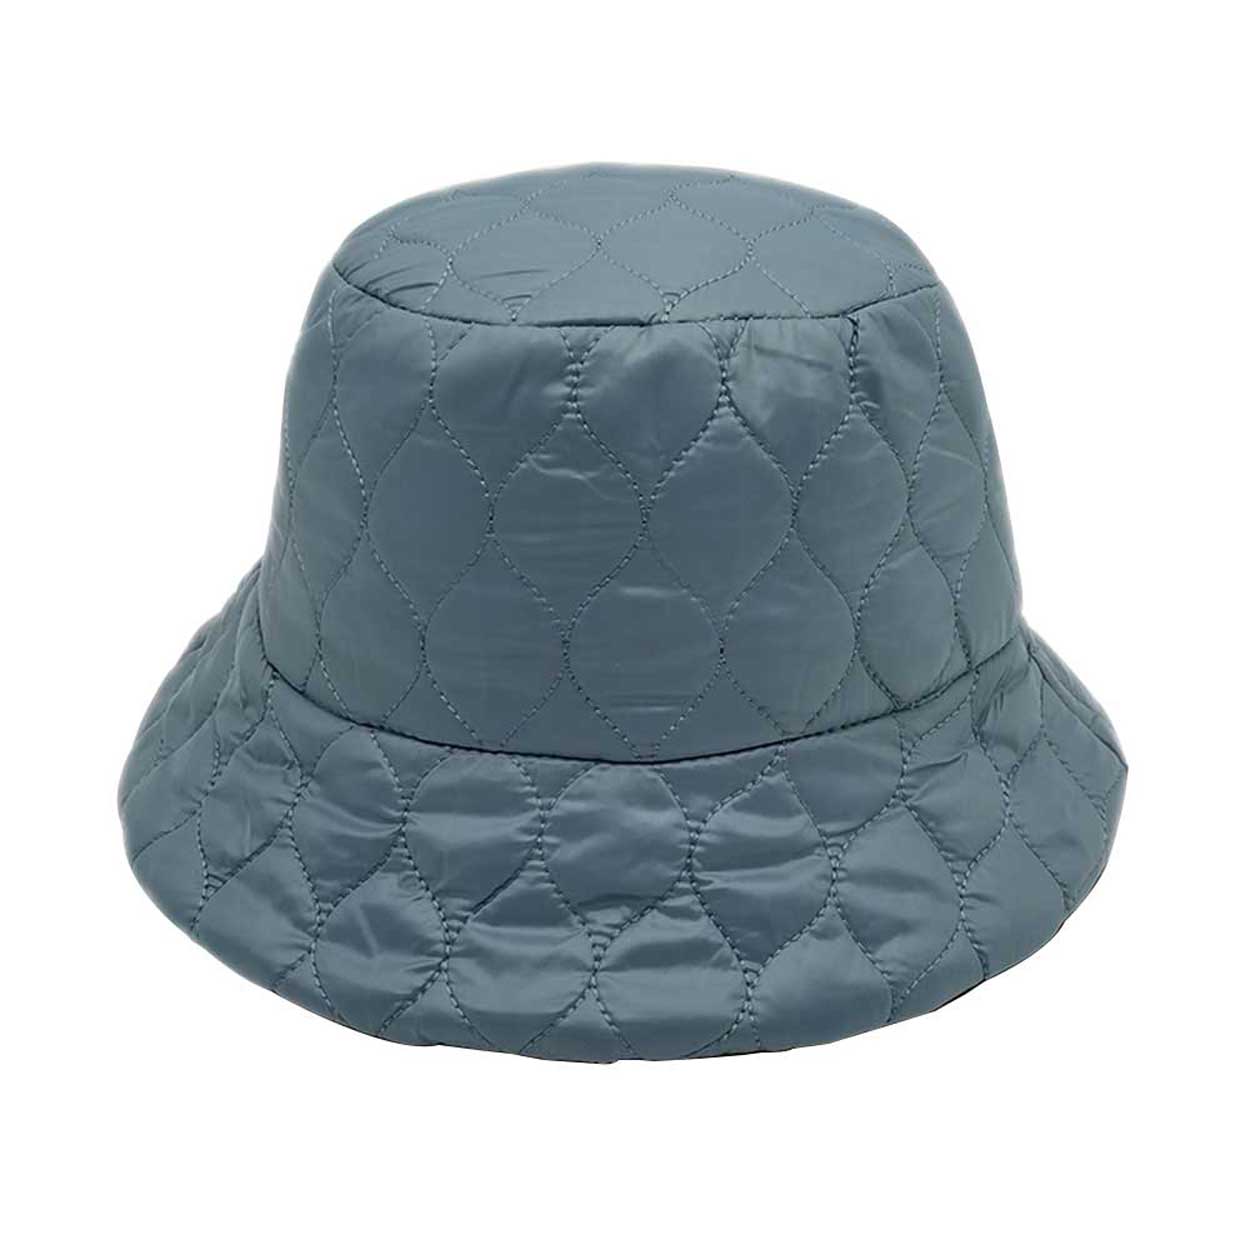 Denim Wave Padded Bucket Hat, Show your trendy side with this chic Wave Padded Bucket Hat. Have fun and look Stylish anywhere outdoors. Great for covering up when you are having a bad hair day. Perfect for protecting you from the sun, rain, wind, snow, beach, pool, camping, or any outdoor activities. Amps up your outlook with confidence with this trendy bucket hat.